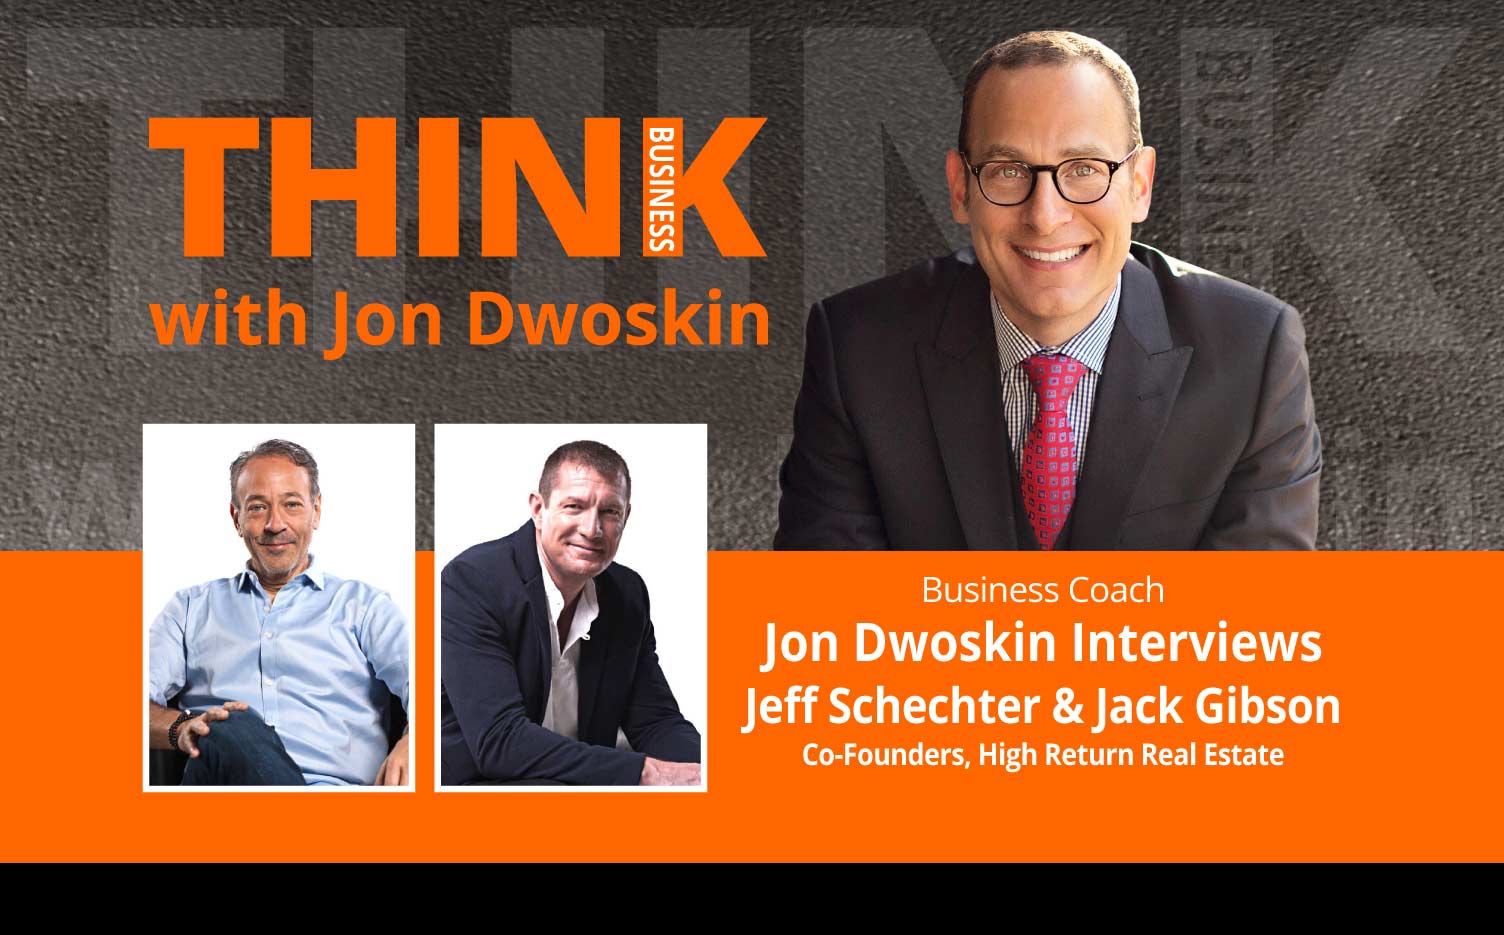 THINK Business Podcast: Jon Dwoskin Interviews Jeff Schechter and Jack Gibson, Co-Founders, High Return Real Estate